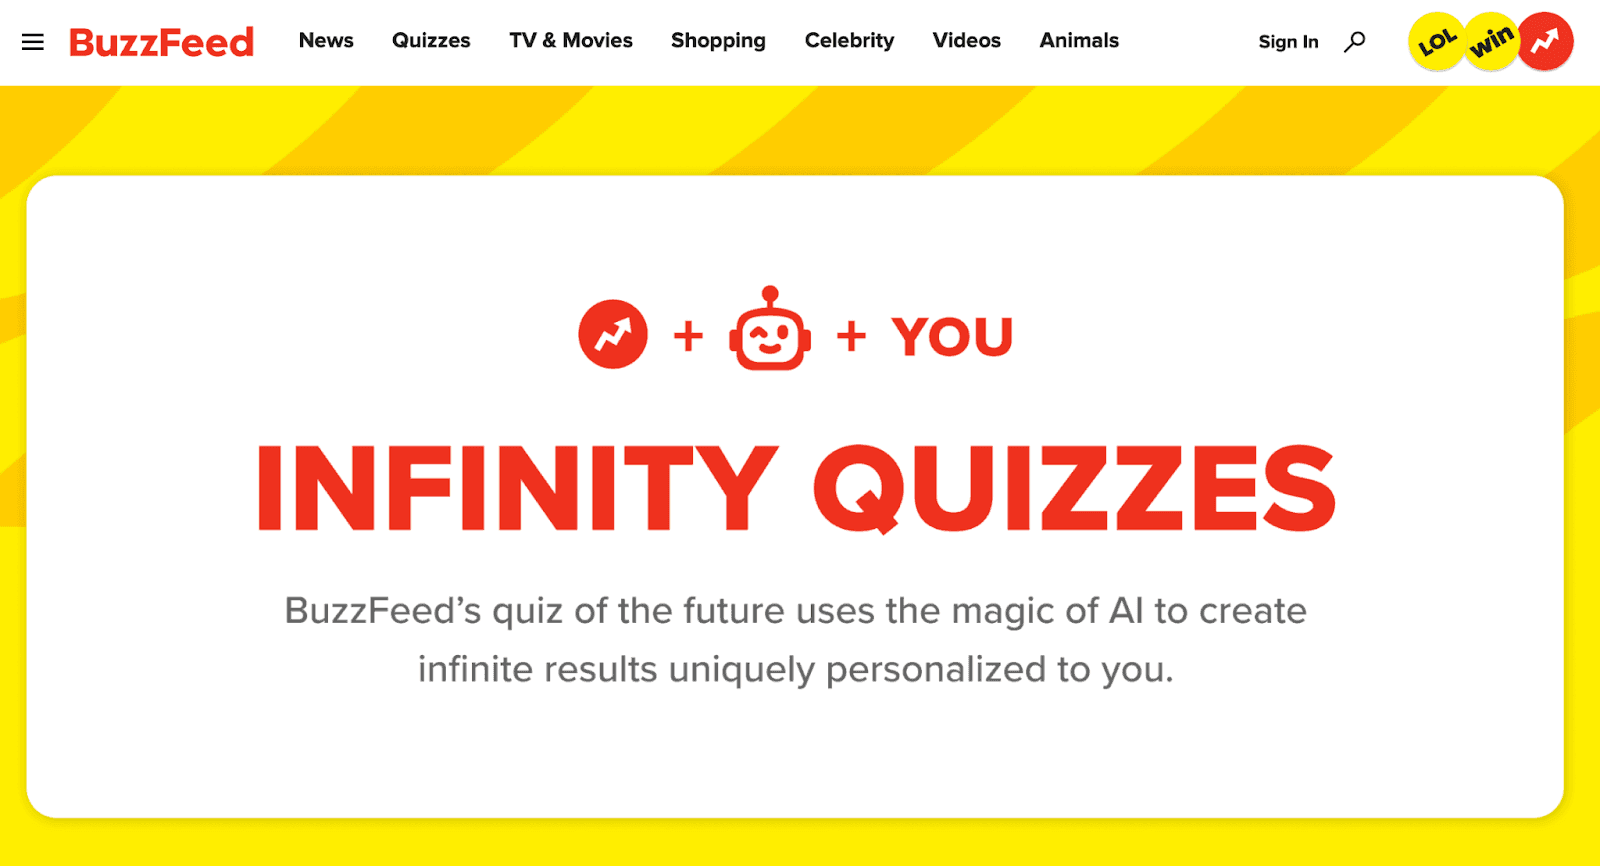 Infinity quizzes - BuzzFeed's quiz of the future uses the magic of AI to create infinite results uniquely personalized to you